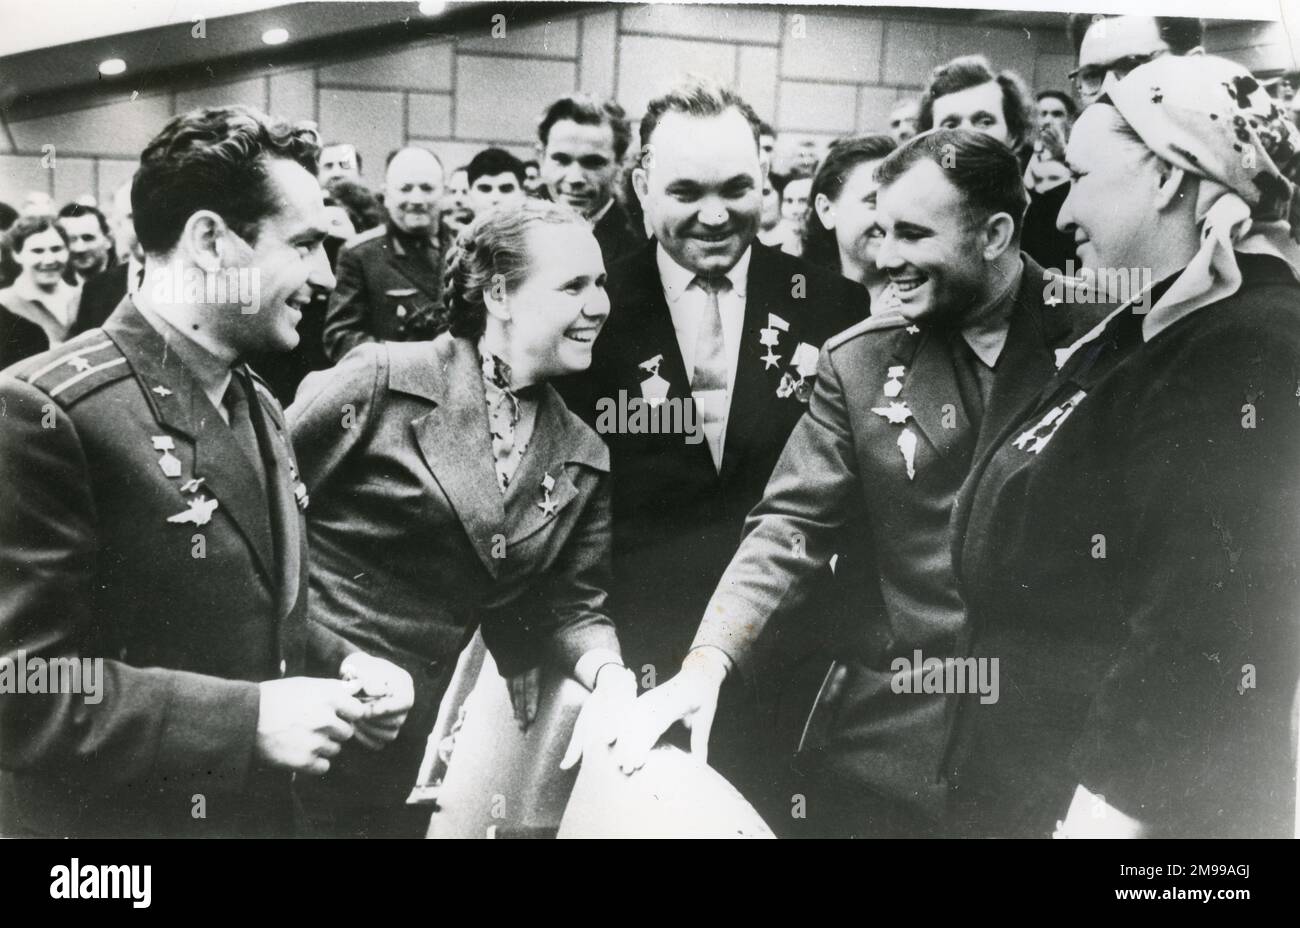 An intermission between sessions at the 22nd Congress of the Soviet Communist Party in the Kremlin Congress palace. From left: Major Herman Titov, V. Gaganova, N. Mamai, Major Yuri Gagarin and E. Dolinyik, October 1961. Stock Photo